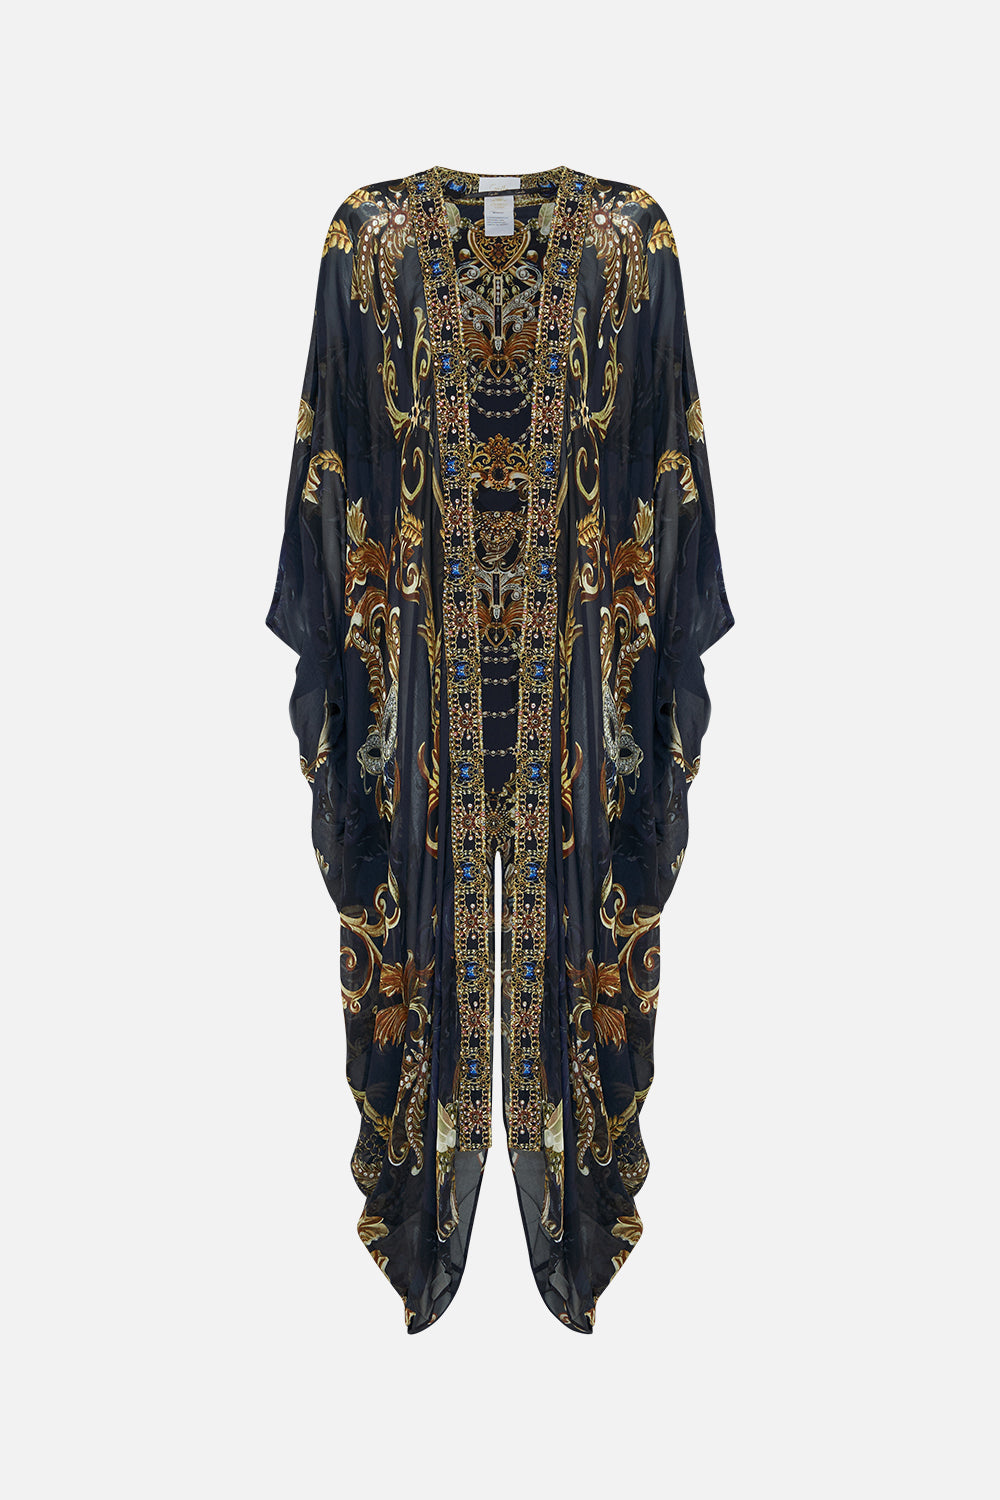 Product view of CAMILLA silk kimono in Moonlight Melodies print